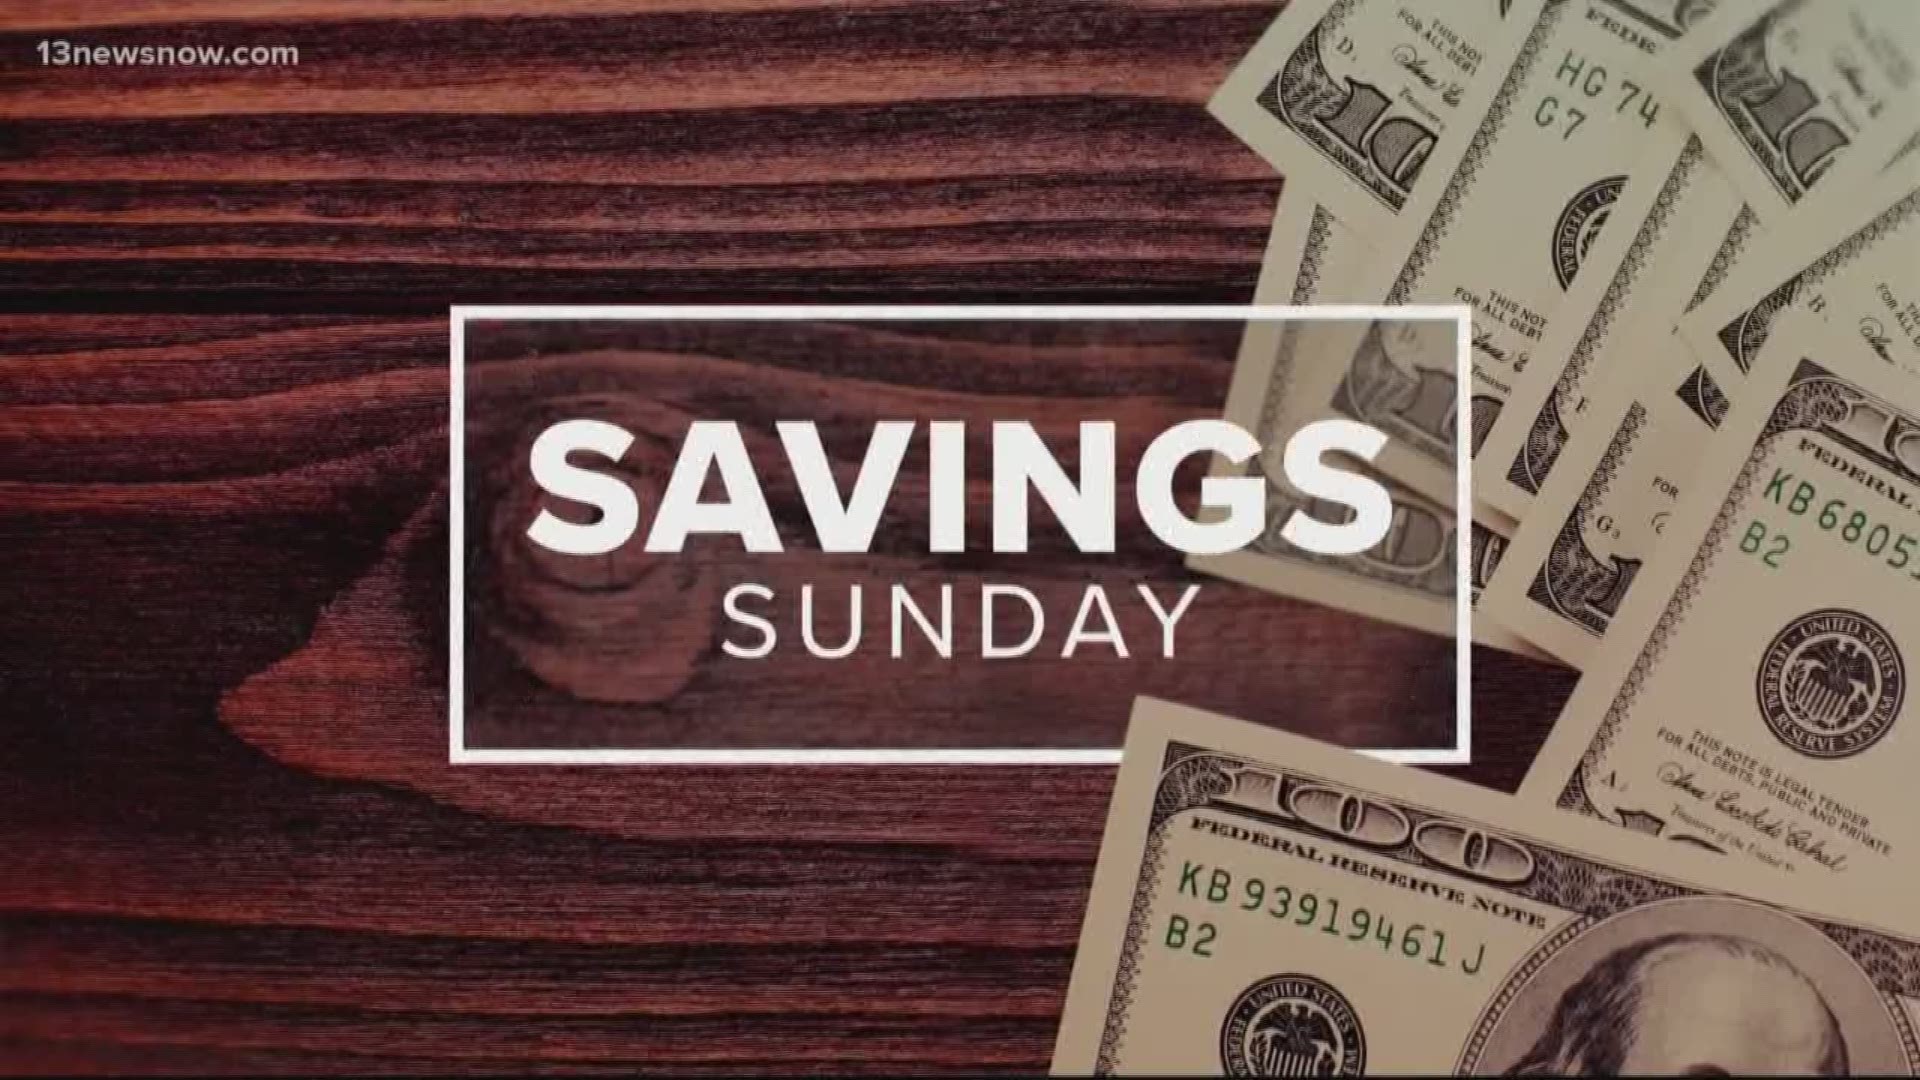 Laura Oliver from www.afrugalchick.com has your big savings for the week of October 27, 2019.